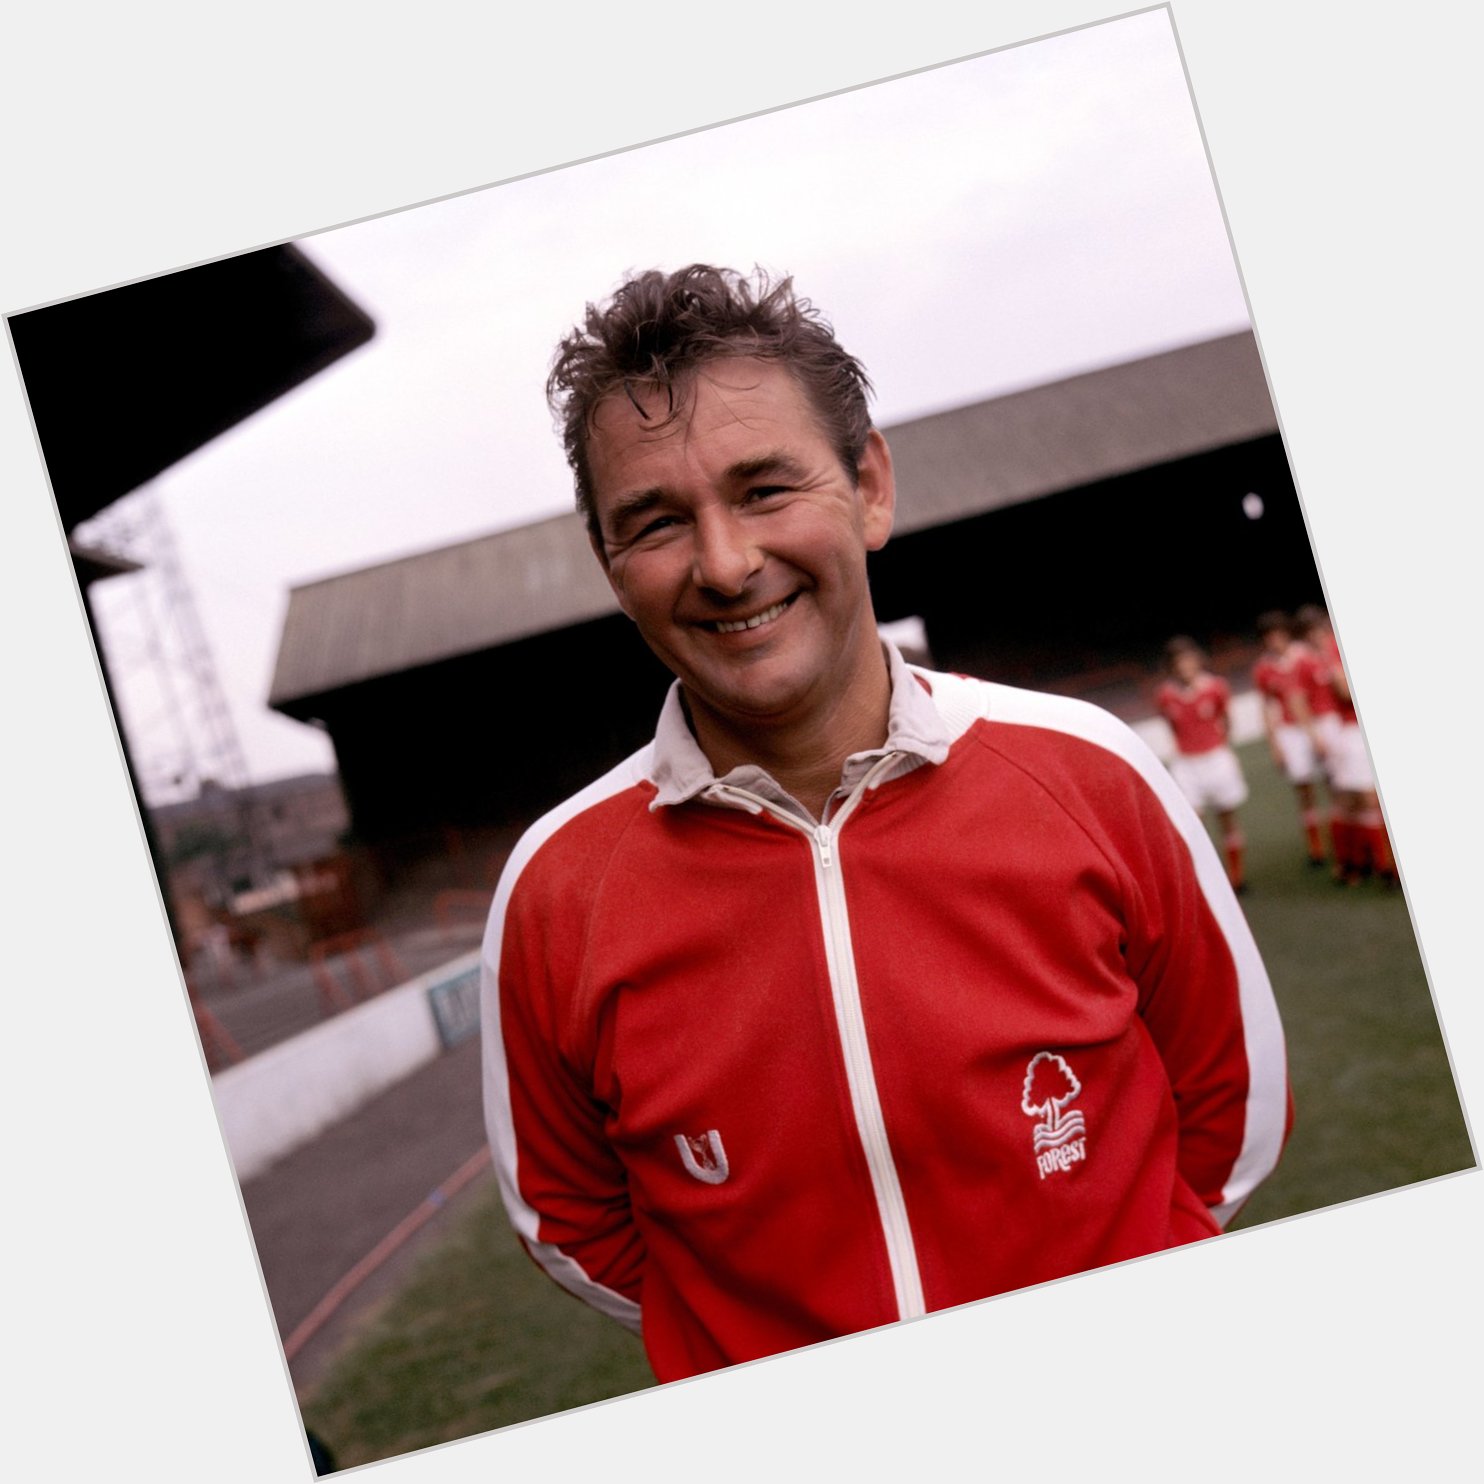 Happy birthday to The Greatest. 

Brian Clough would have been 86 today. 